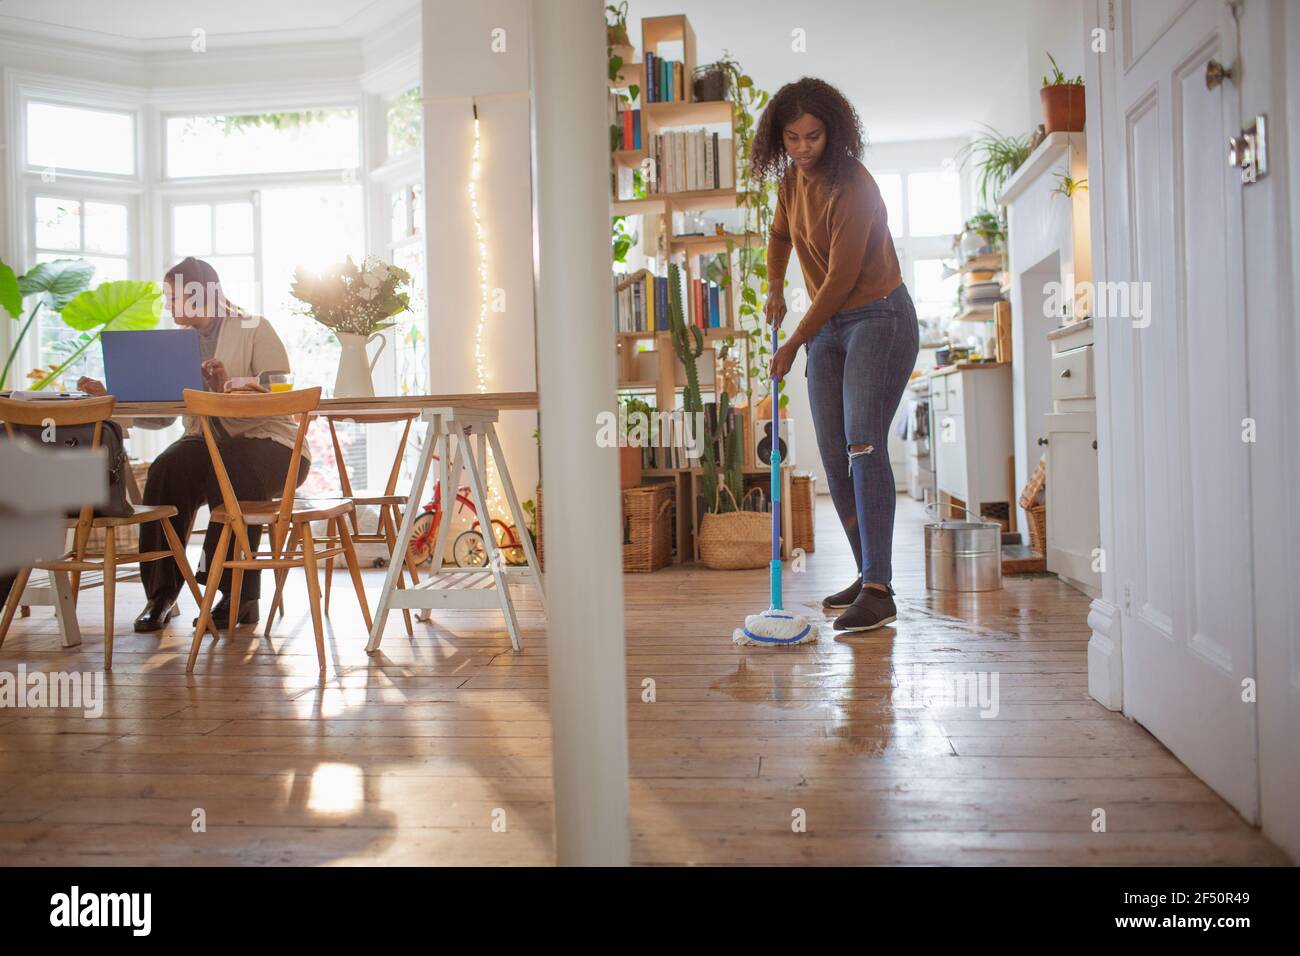 Women working and mopping hardwood floor in apartment Stock Photo